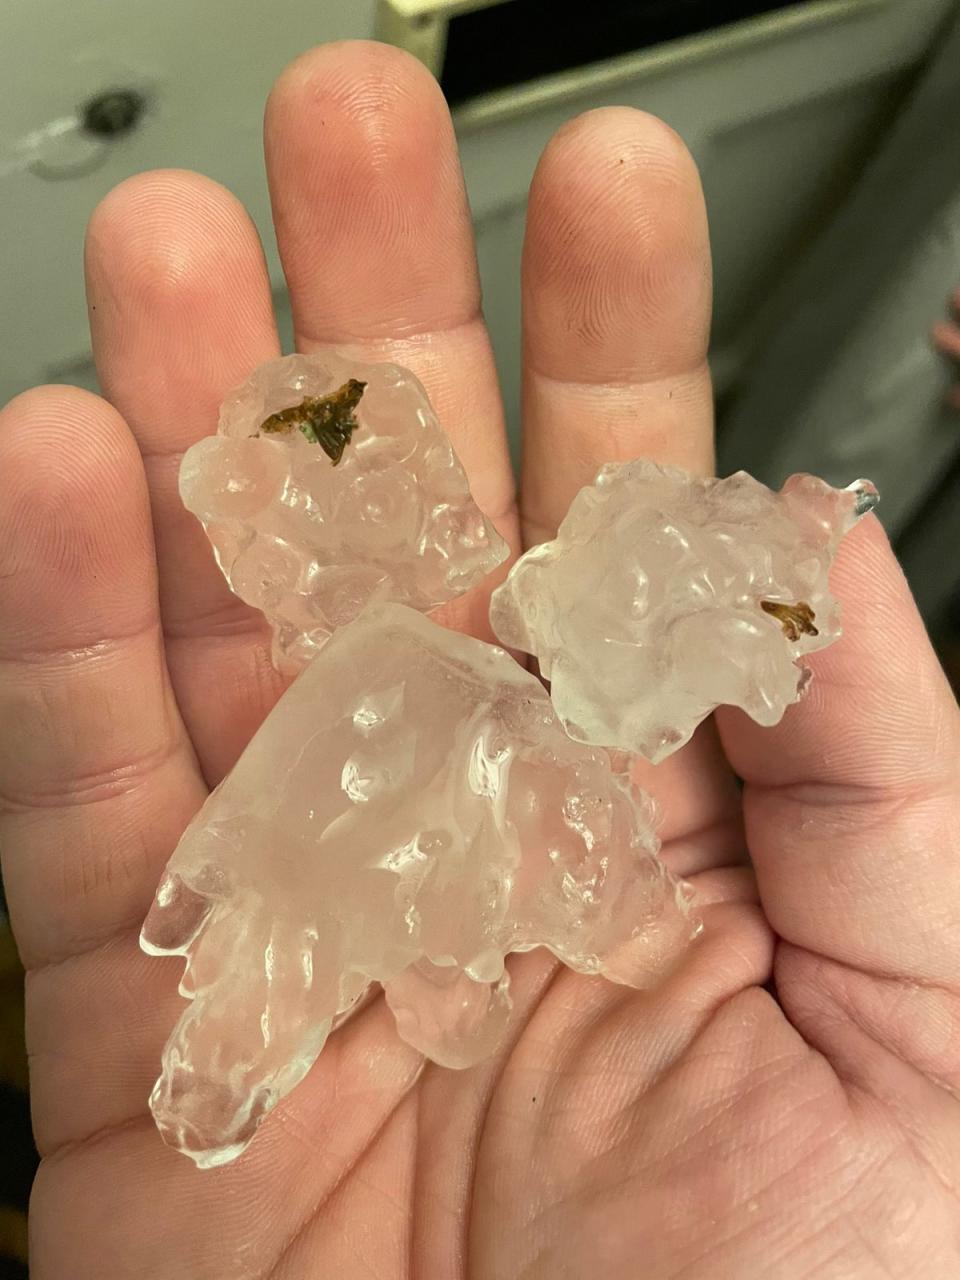 Carl Walker said golf ball-sized hailstones rained down across the island on Wednesday night (Supplied)